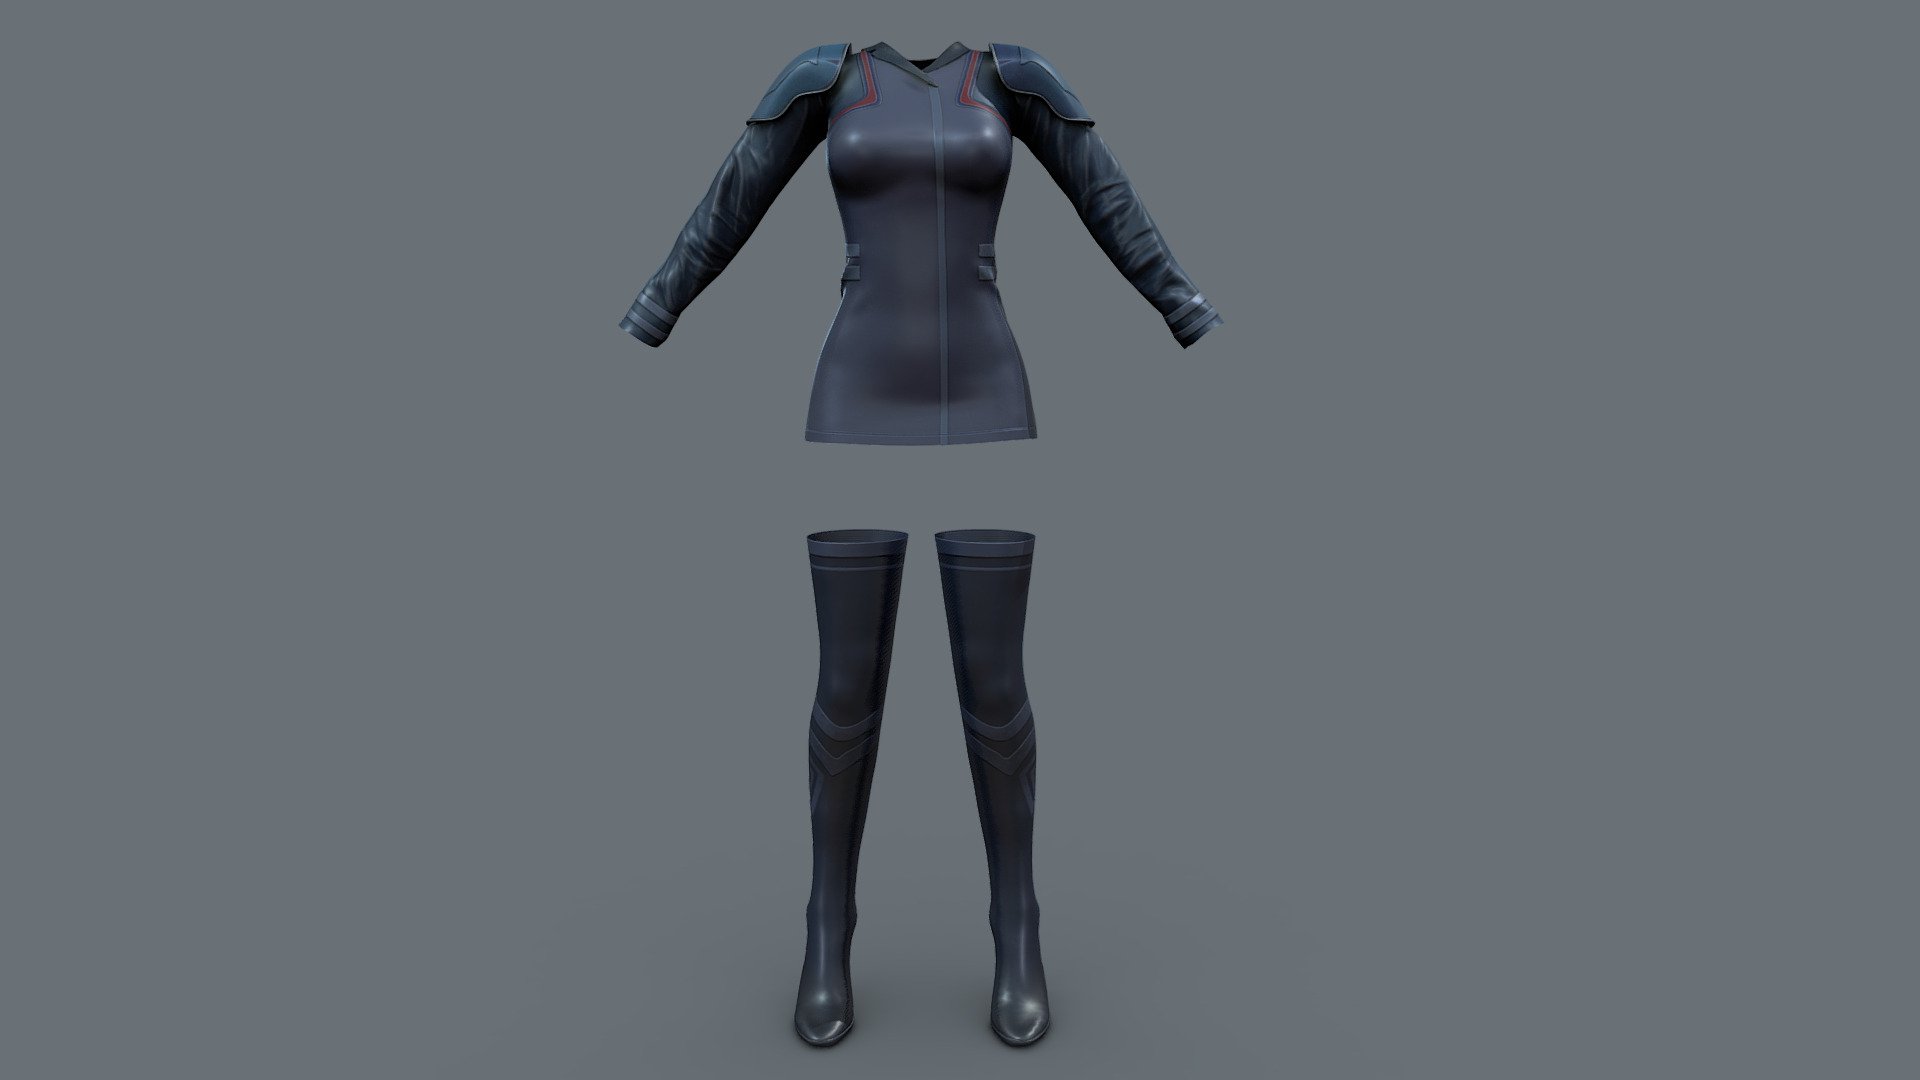 Can be fitted to any character

Clean topology

No overlapping smart optimum unwrapped UVs

High-quality realistic textures

FBX, OBJ, gITF, USDZ (request other formats)

PBR or Classic

Please ask any other questions.

Type     user:3dia &ldquo;search term